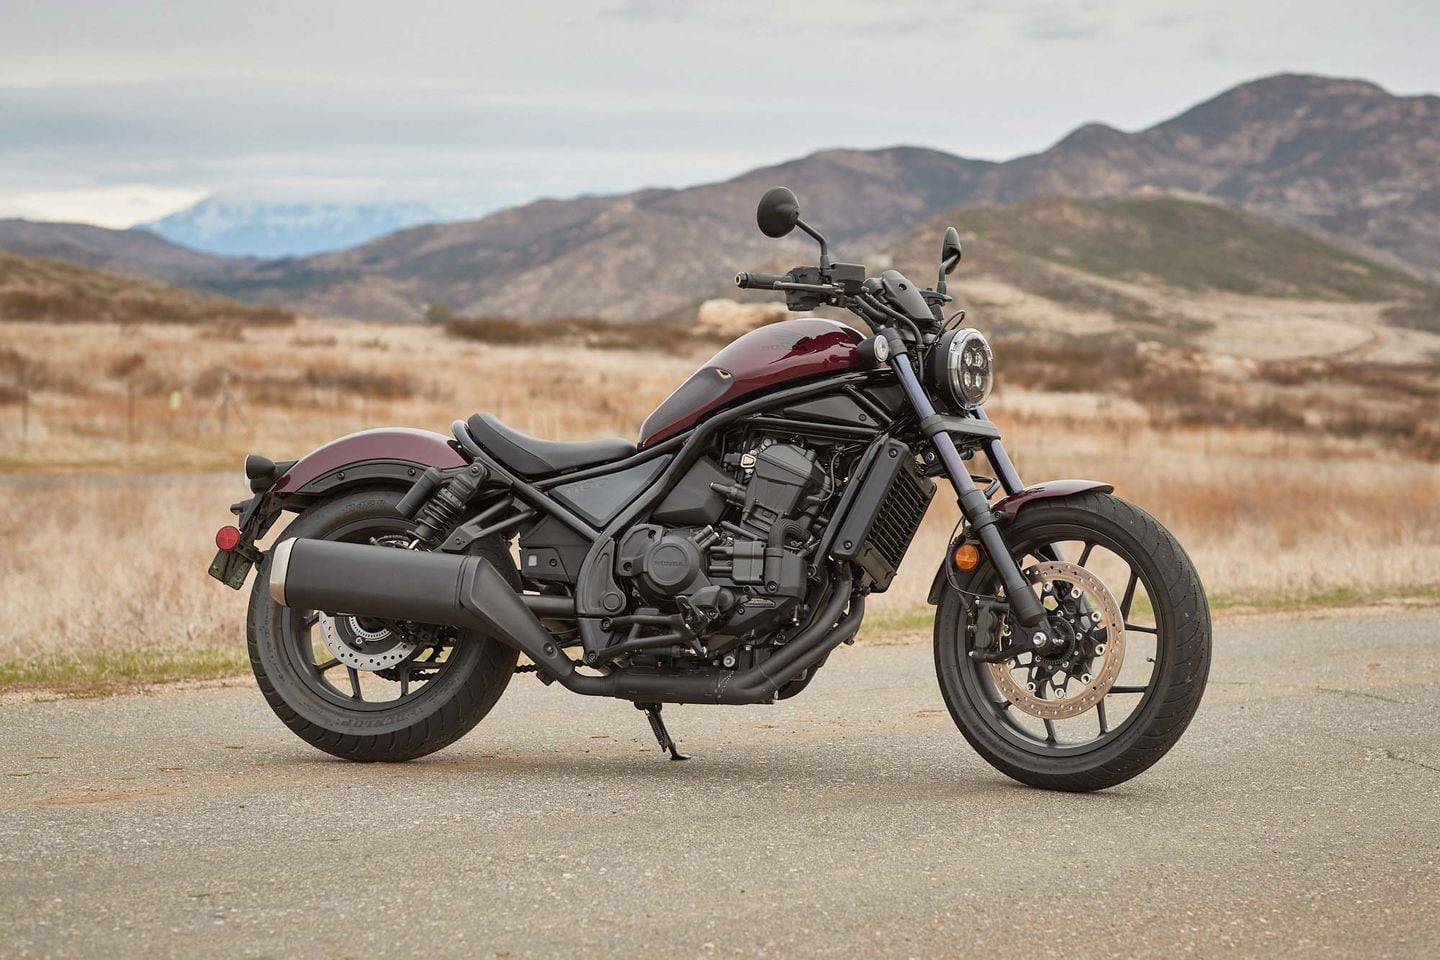 2021 Honda Rebel 1100 First Ride Review | Cycle World